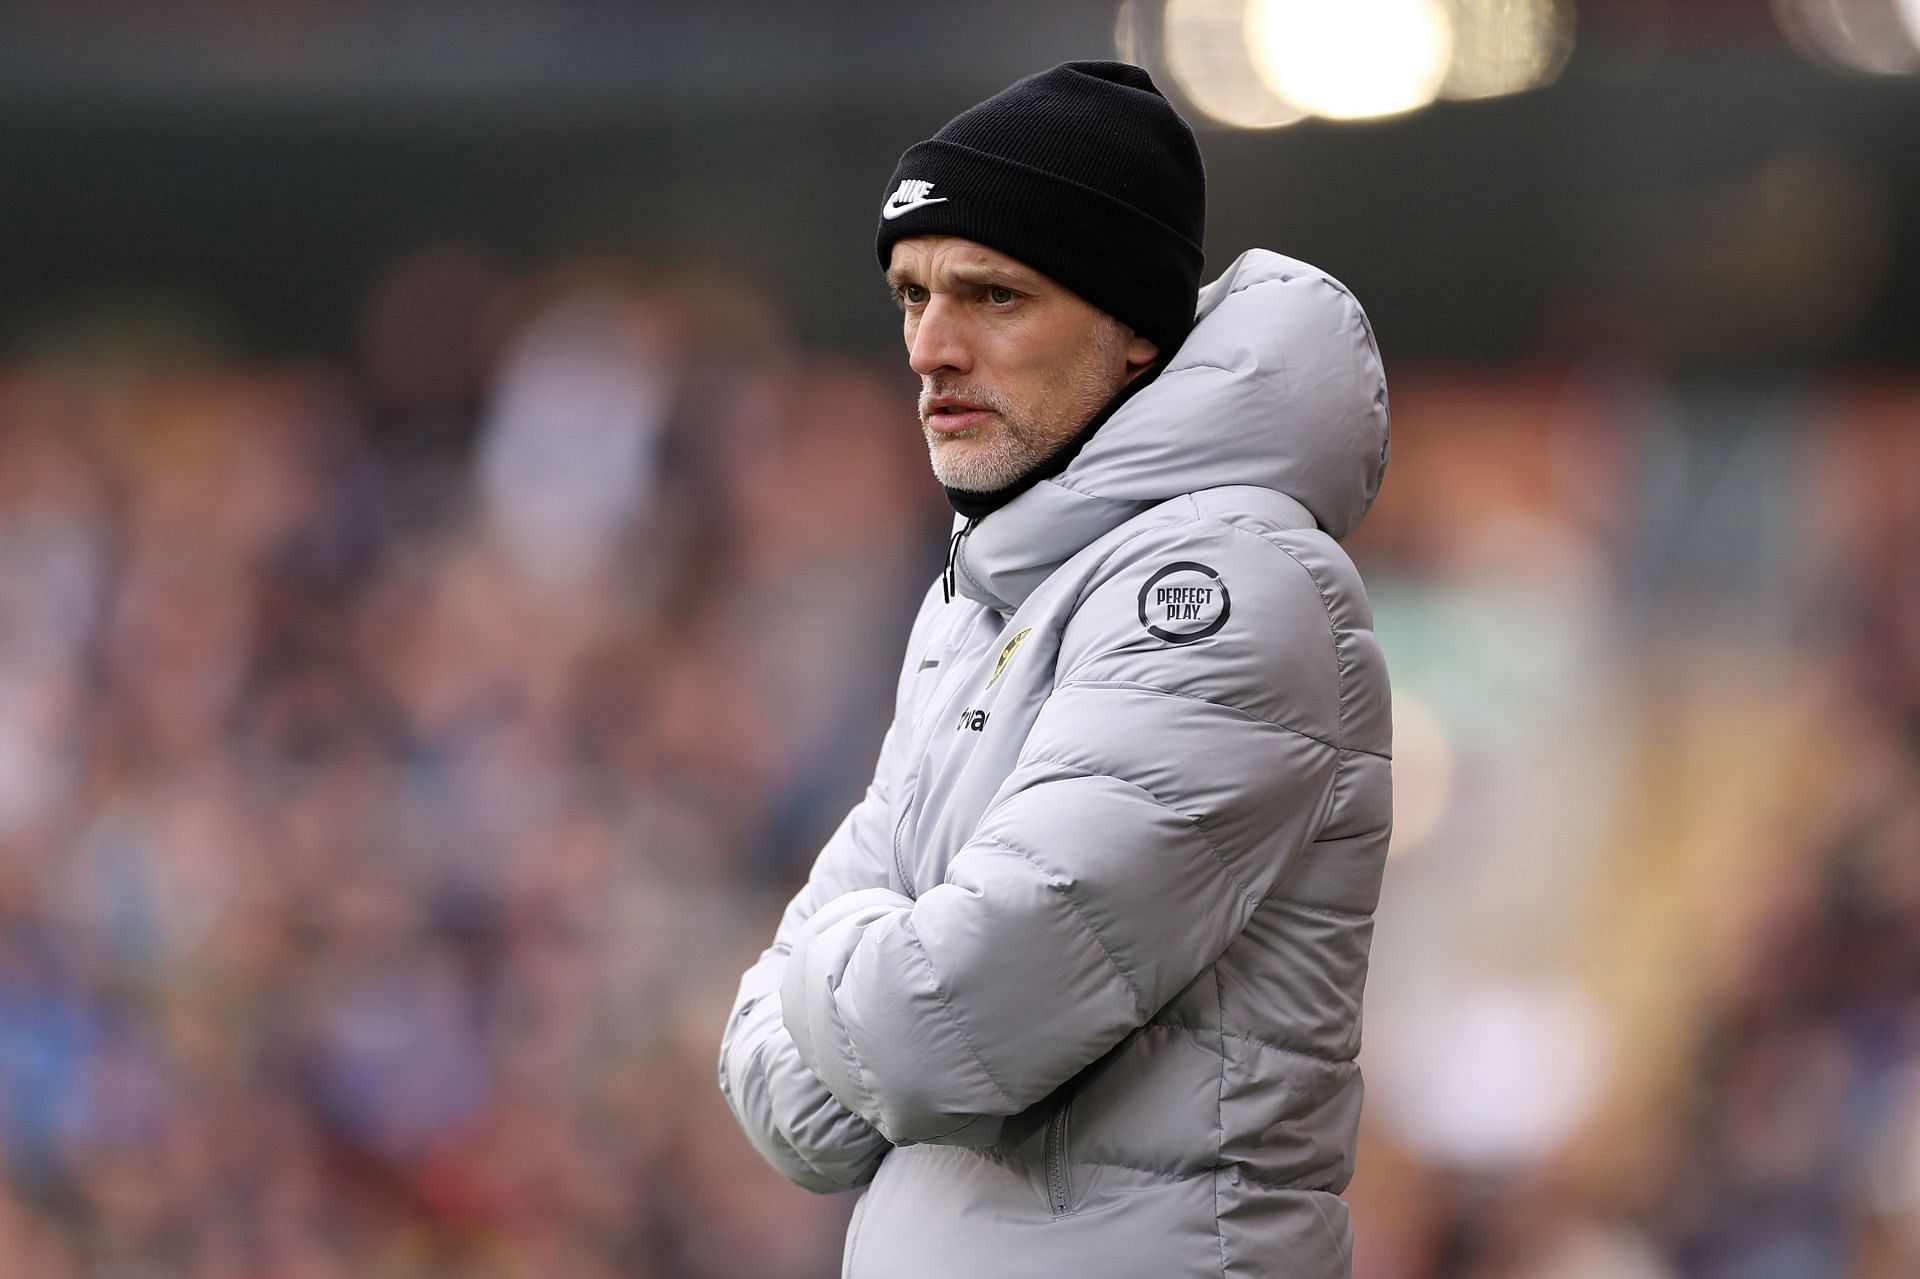 Chelsea manager Thomas Tuchel scripted a morale-boosting win over Southampton.